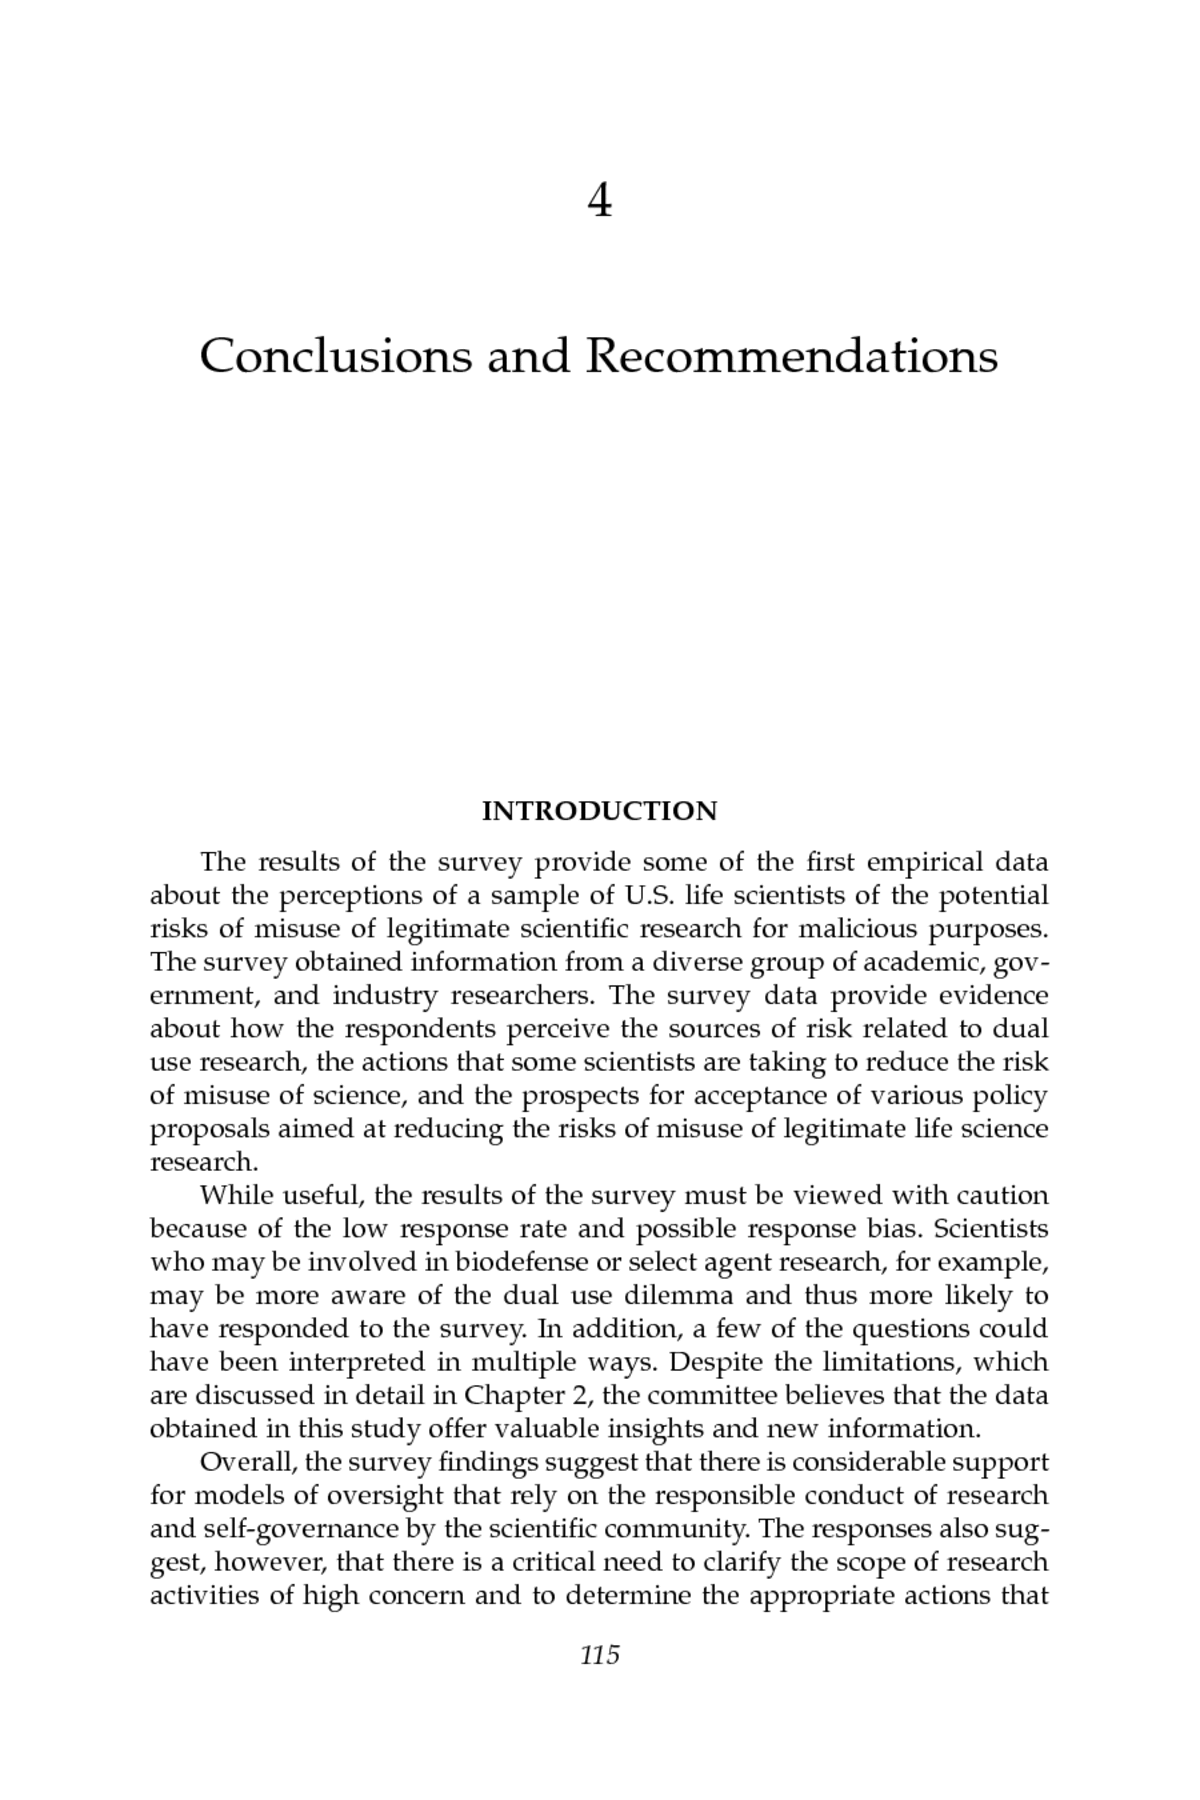 recommendation thesis sample pdf